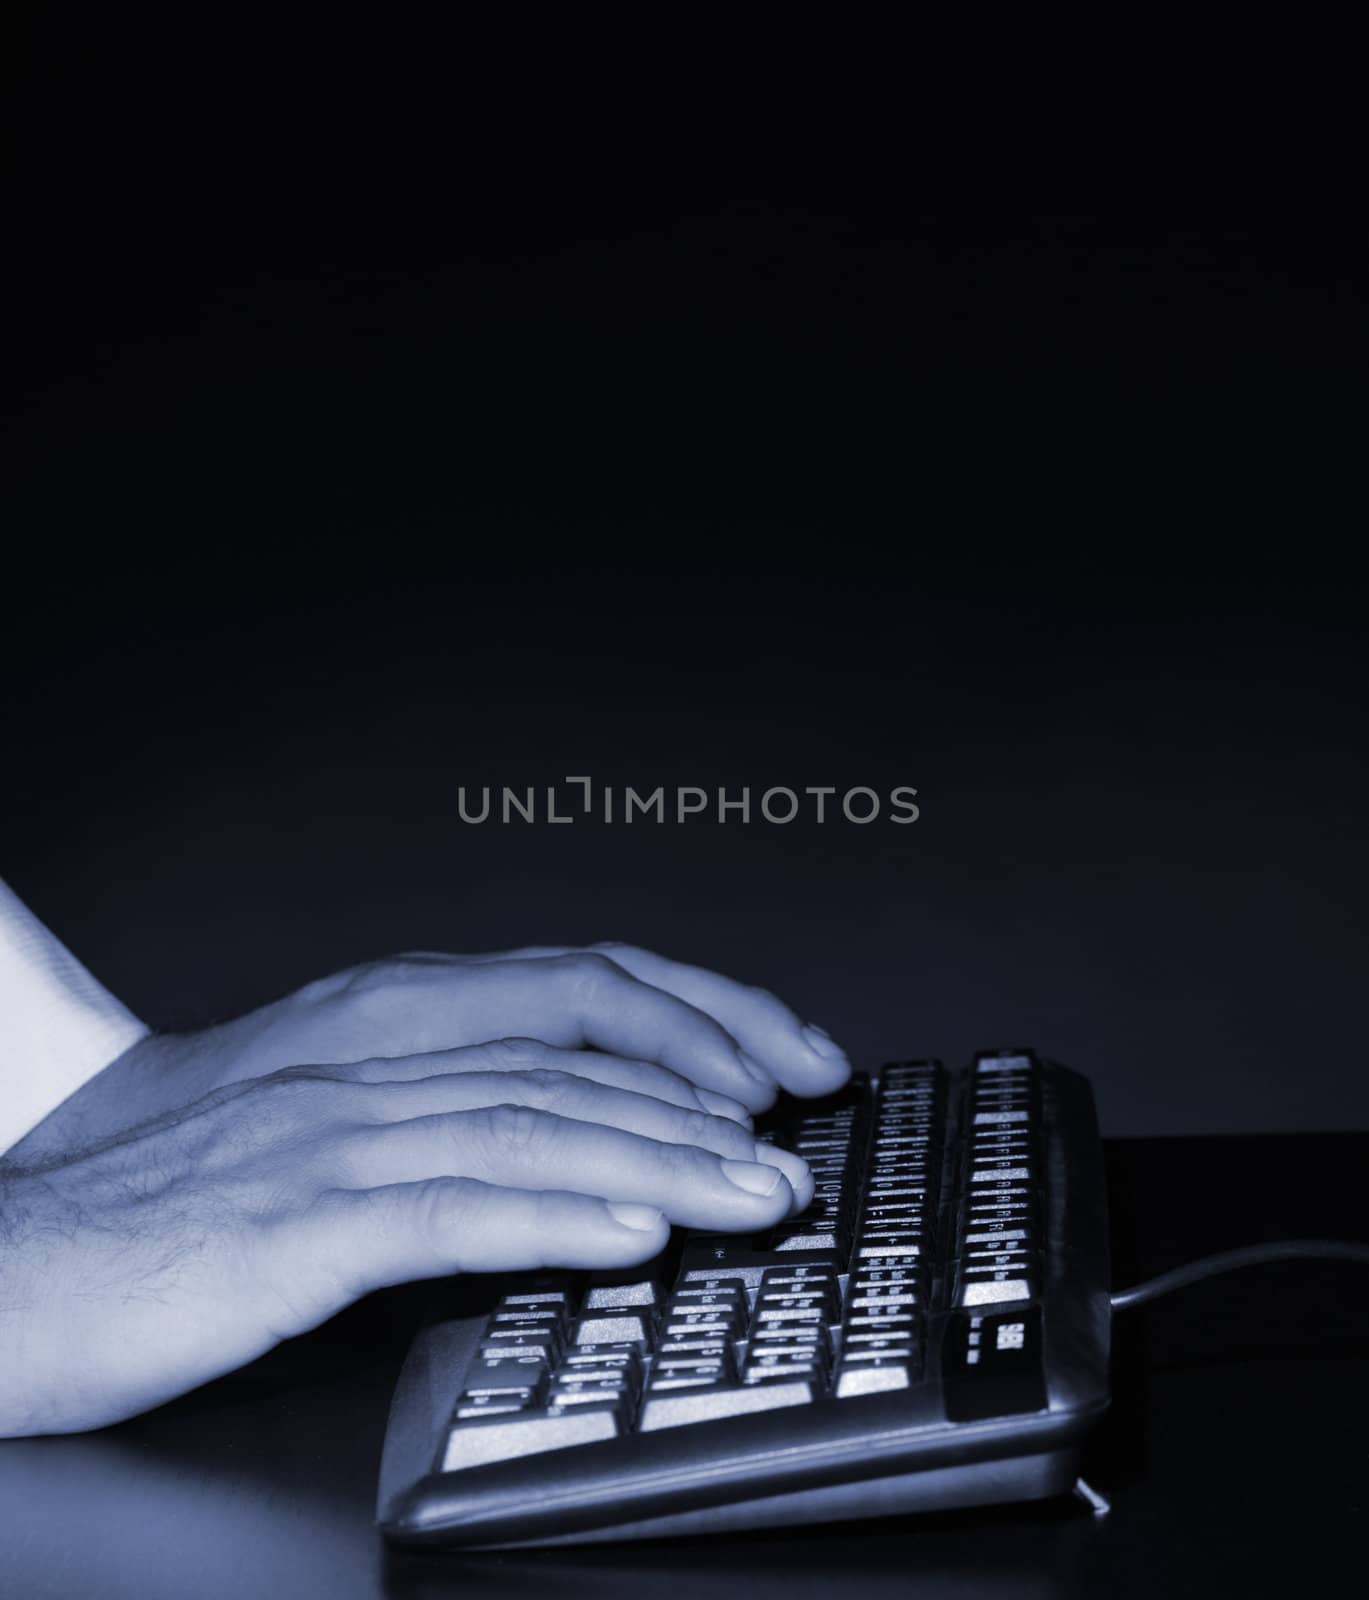 Hands above the keyboard by galdzer